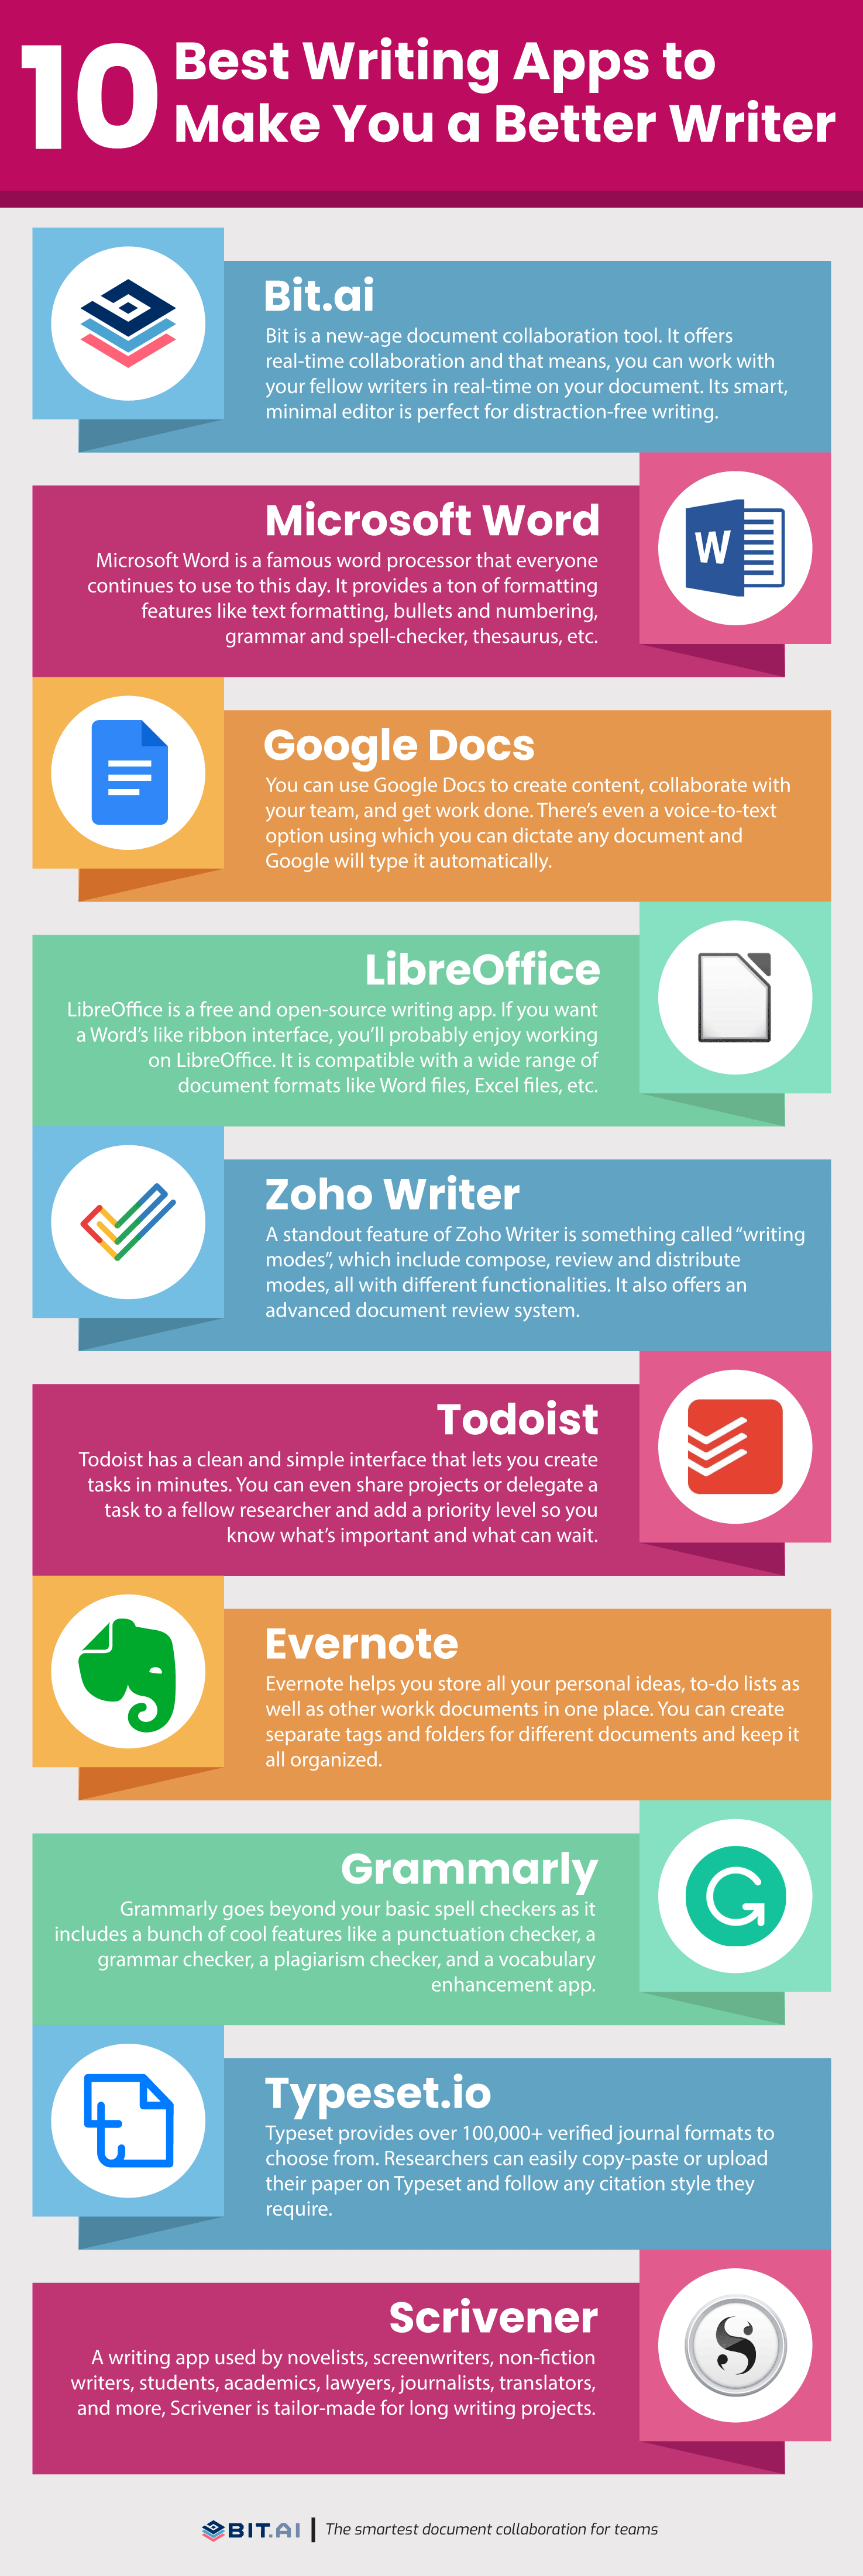 Writing apps infographic